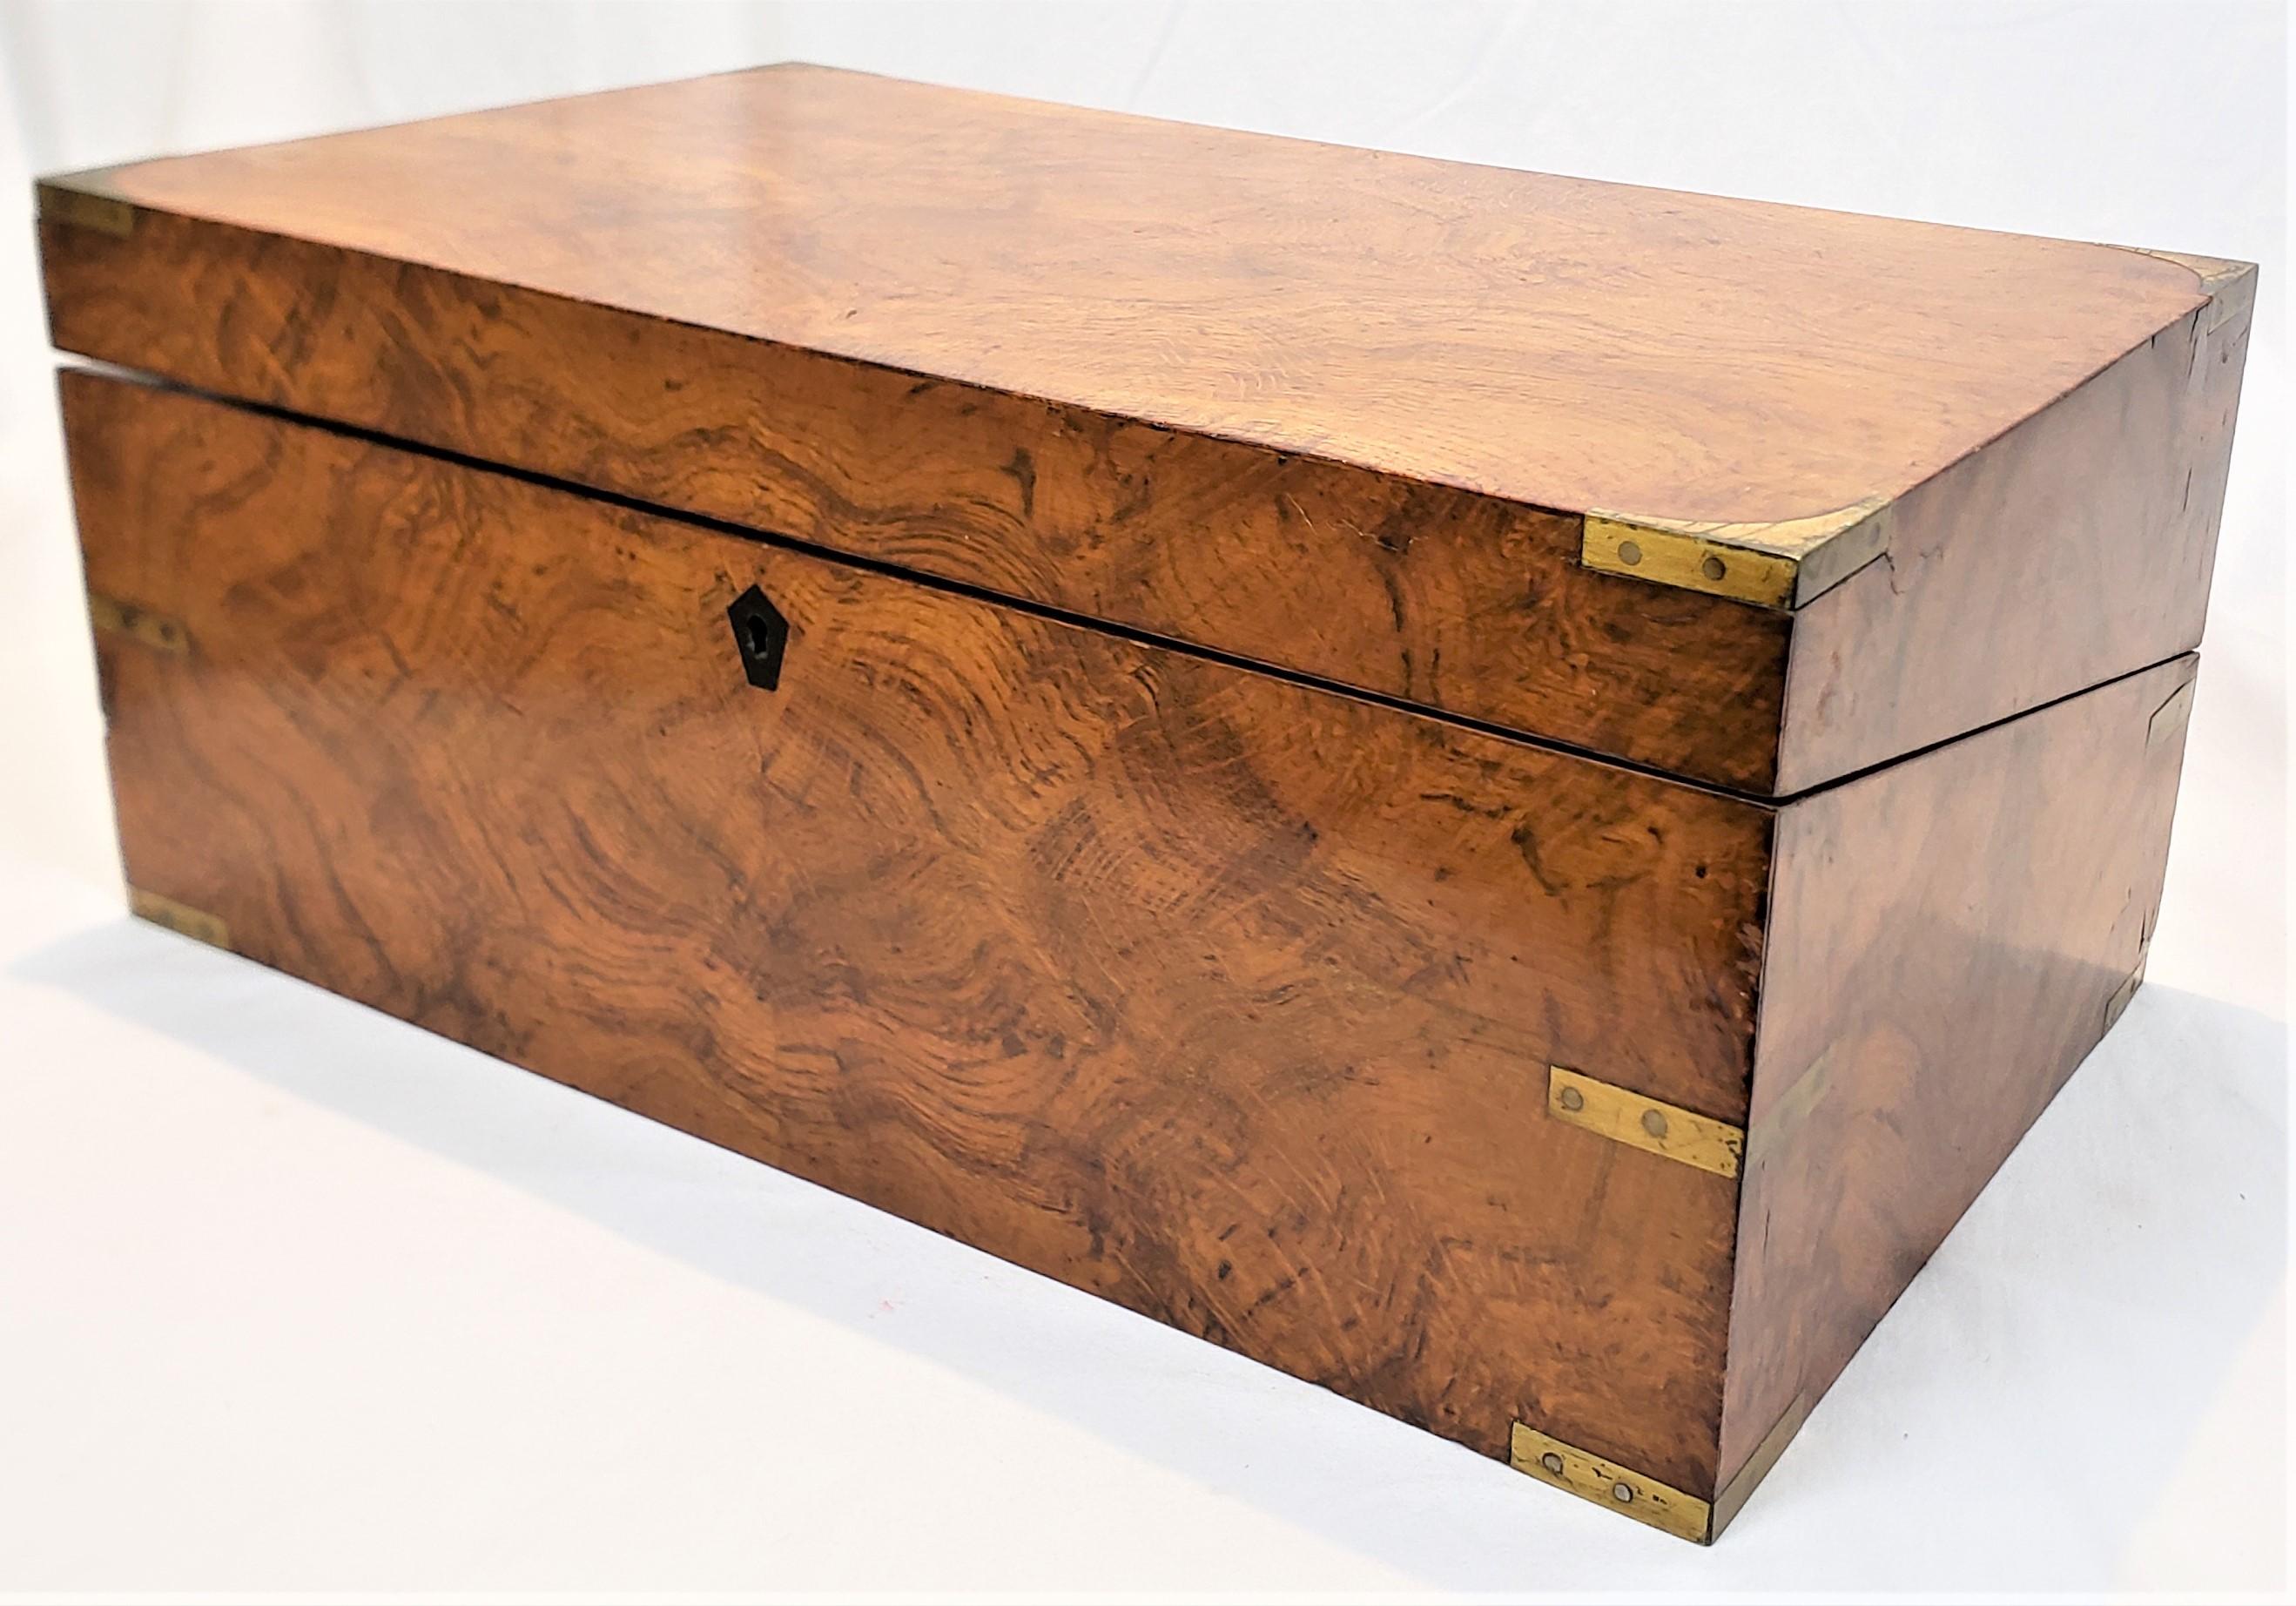 This antique campaign box is unsigned, but presumed to have originated from England and date to approximately 1820 and done in the period Victorian style. The lap desk is composed of walnut with brass mounts and fittings and has a drawer with dove